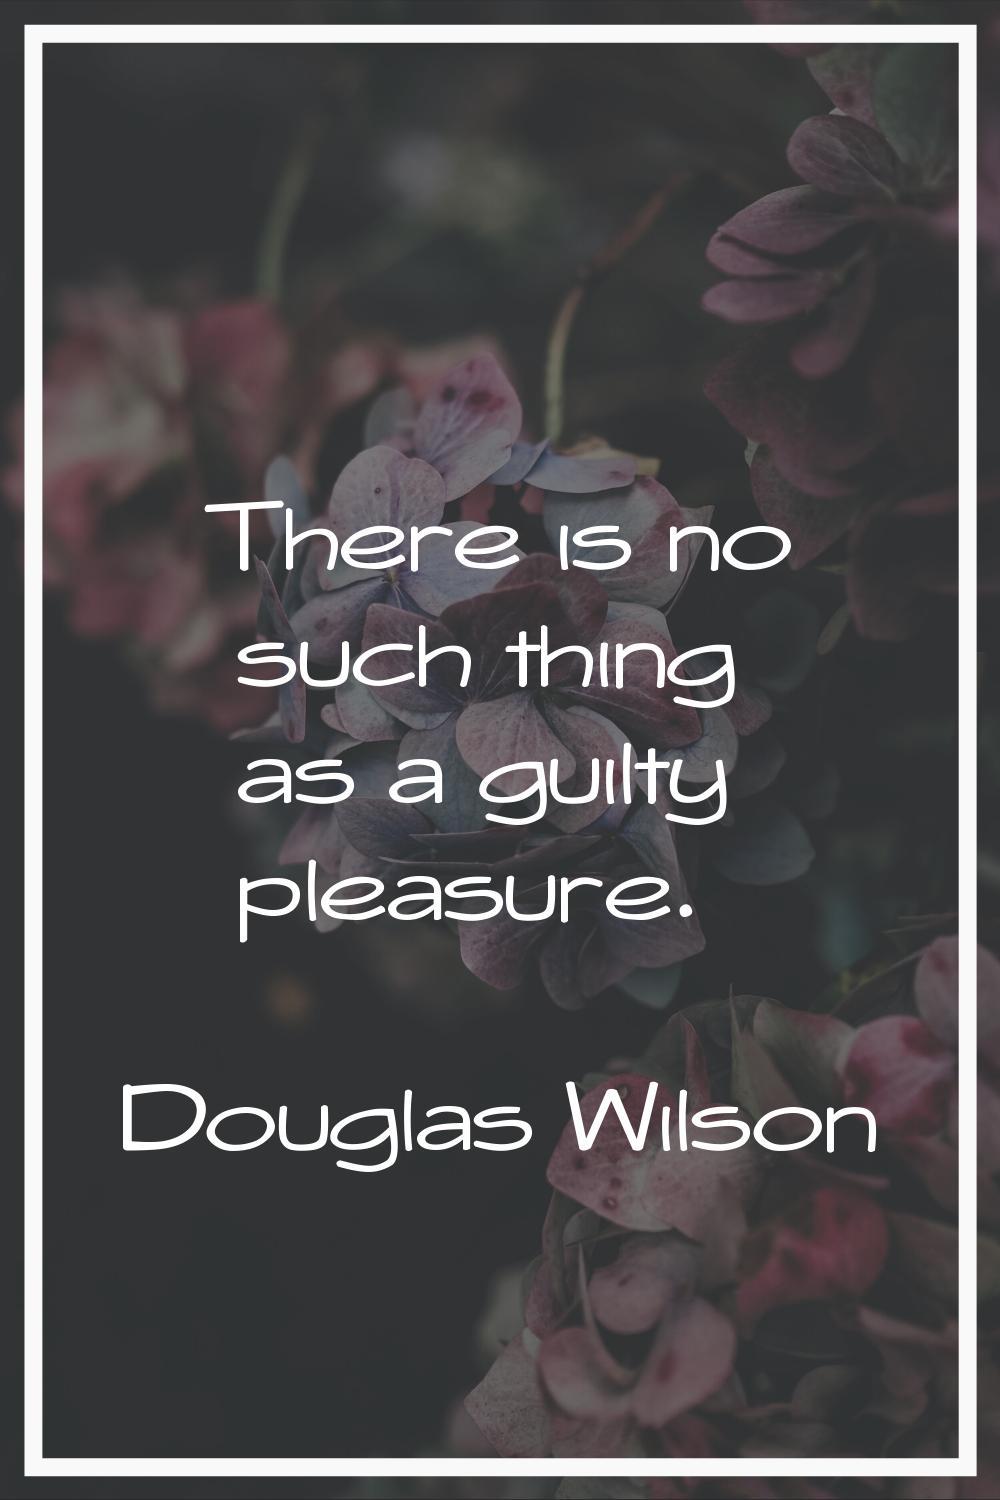 There is no such thing as a guilty pleasure.